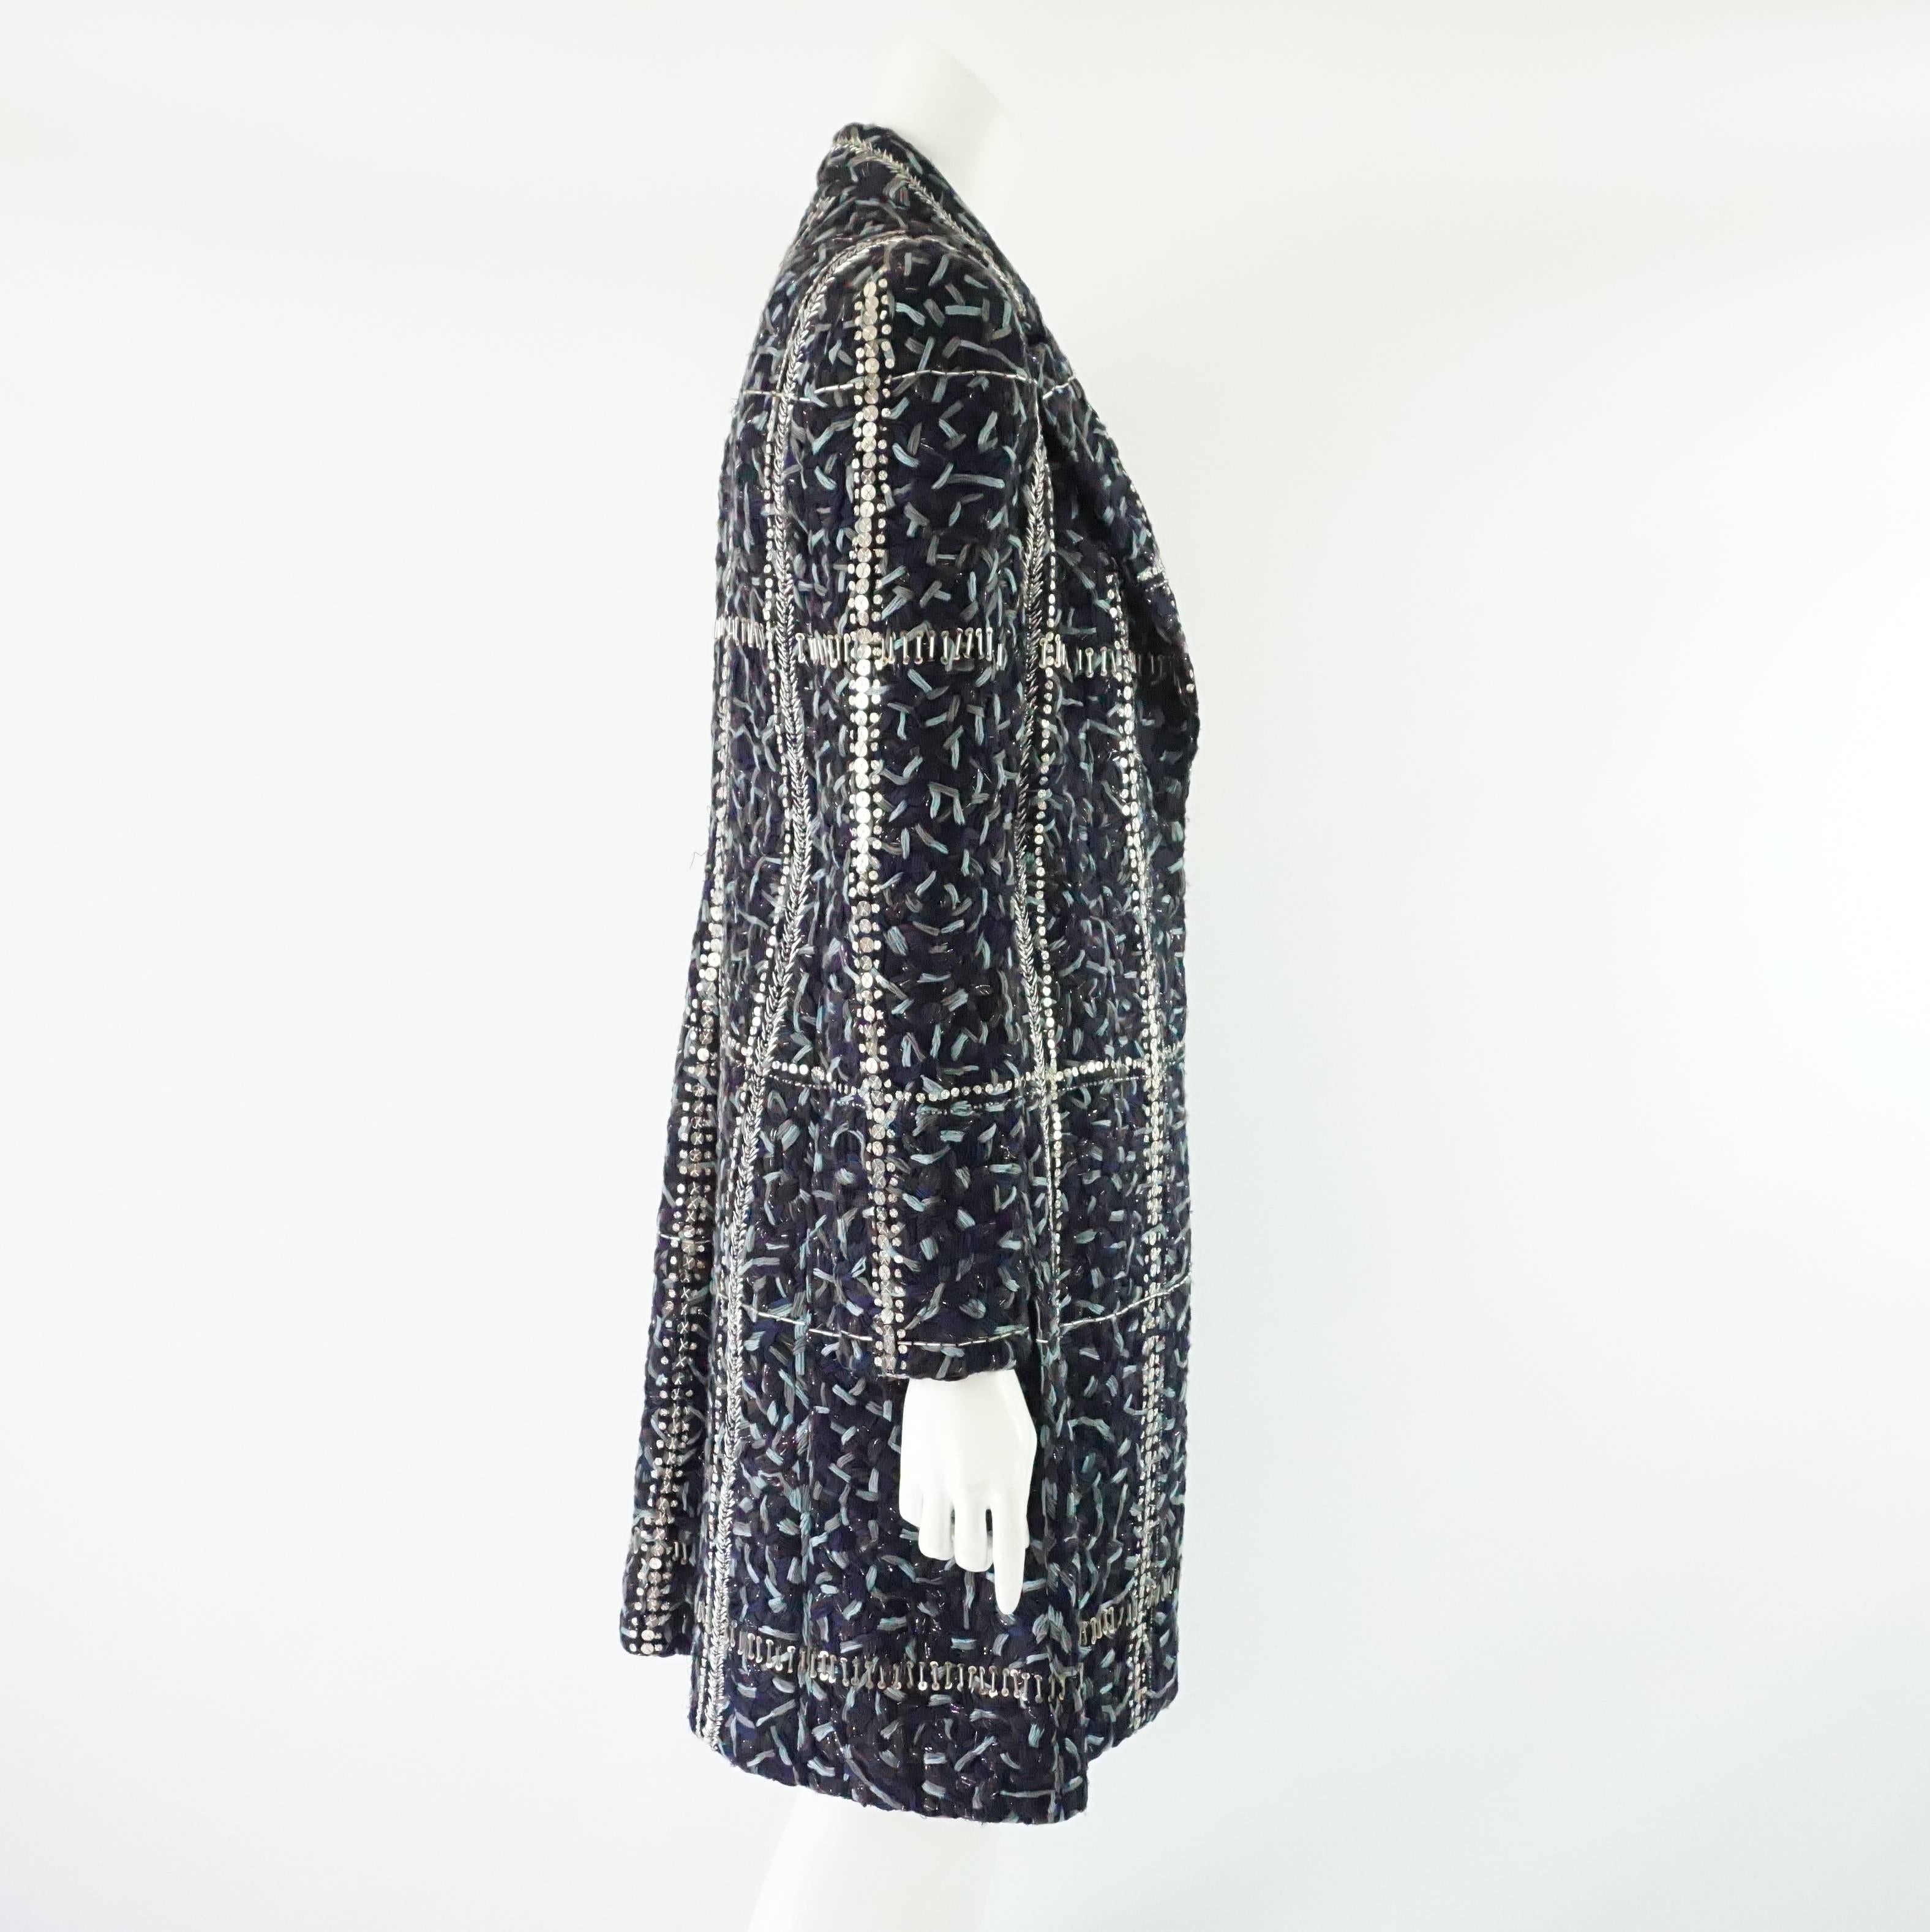 This beautiful Bill Blass wool coat is textured and has beads and sequins making a checkered pattern. The fabric is a mixture of light blue, dark blue, purple, gray, and black. This coat is in excellent vintage condition with some loose beads and